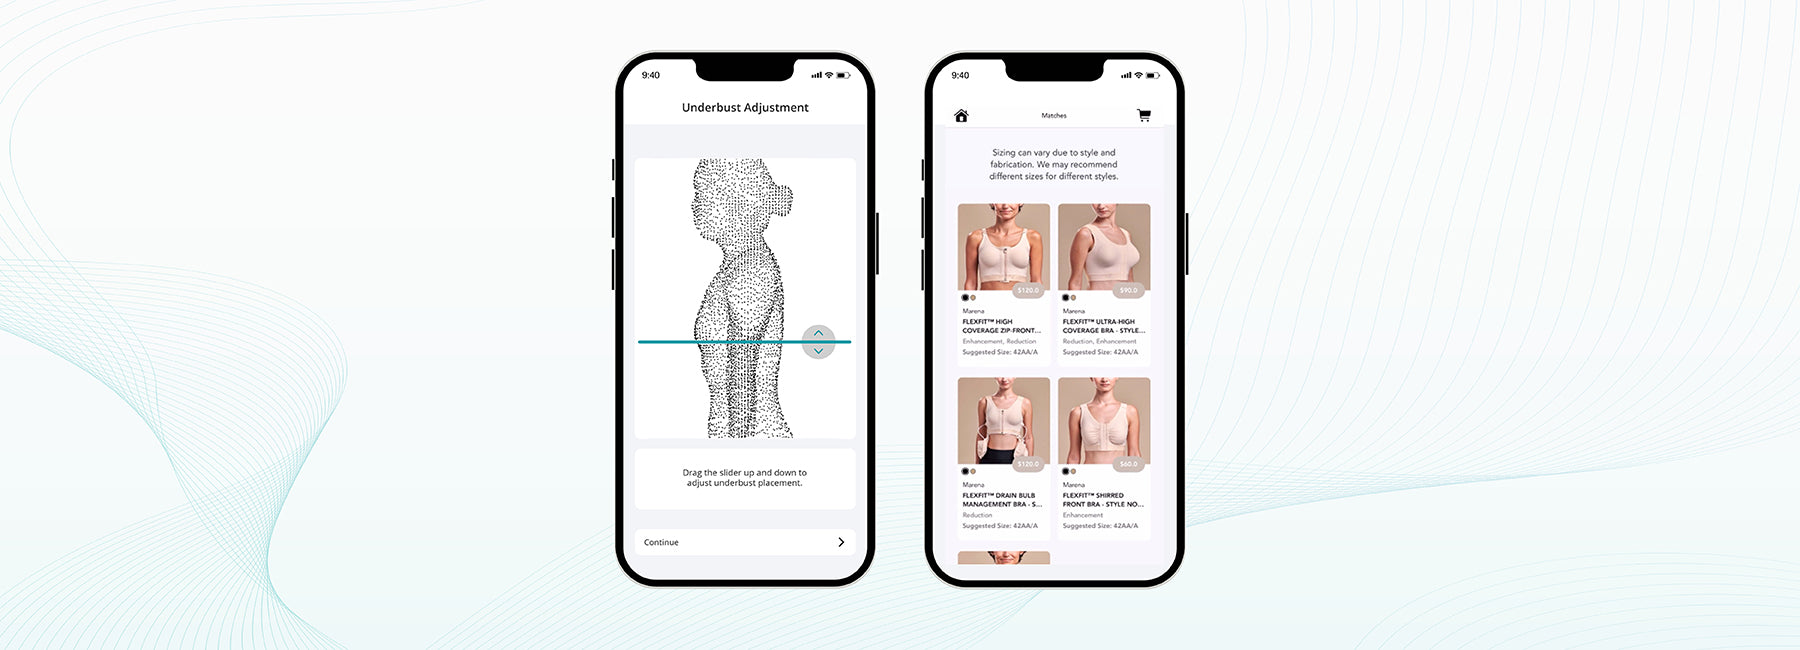 The Marena Group and Fit:match Partner to Launch AI-Driven, 3D Body-Scanning App